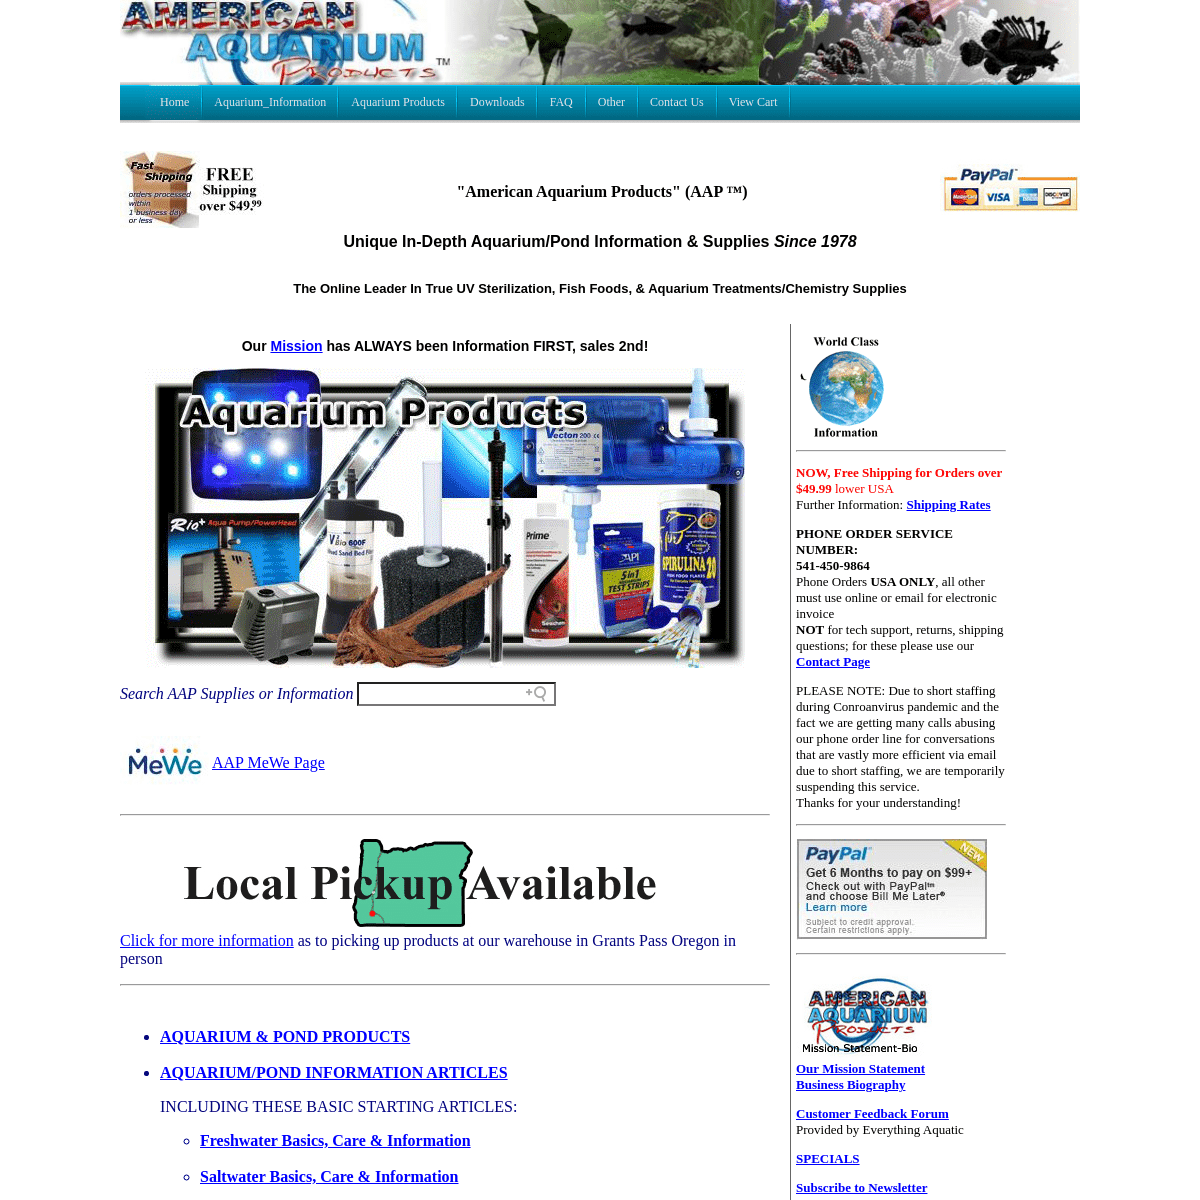 A complete backup of https://americanaquariumproducts.com